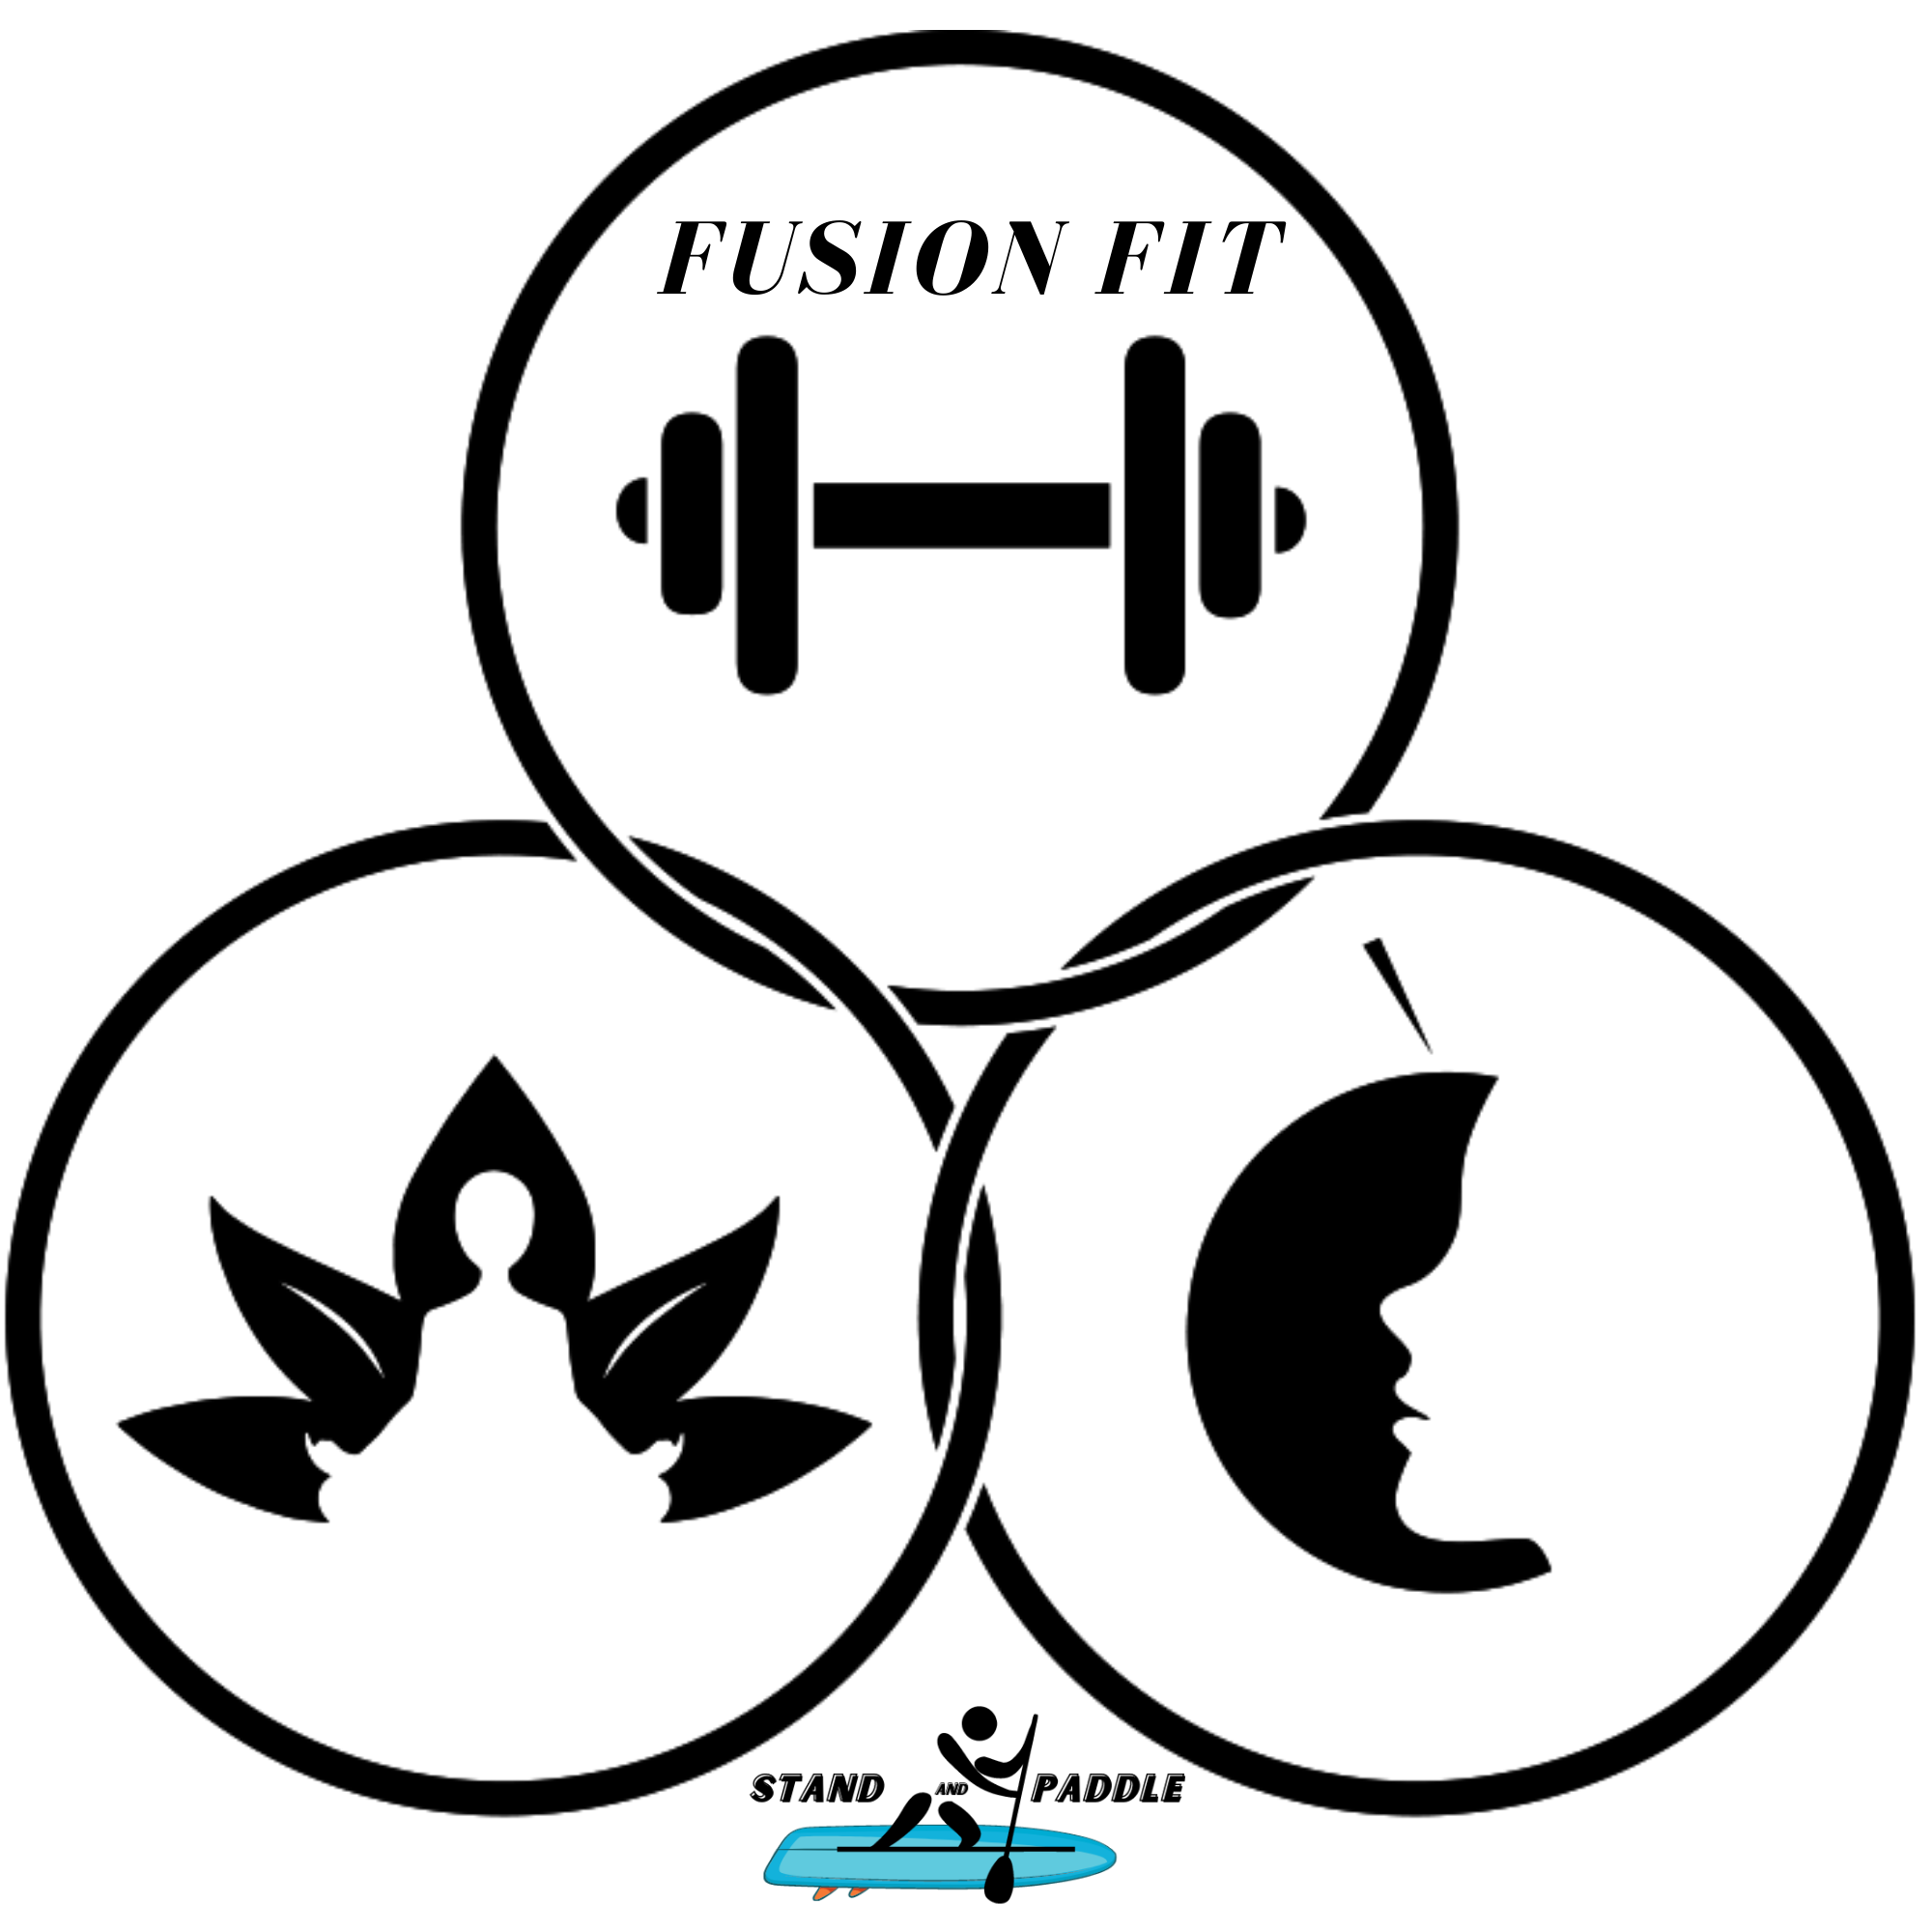 Fusion Fit/Stand and Paddle logo